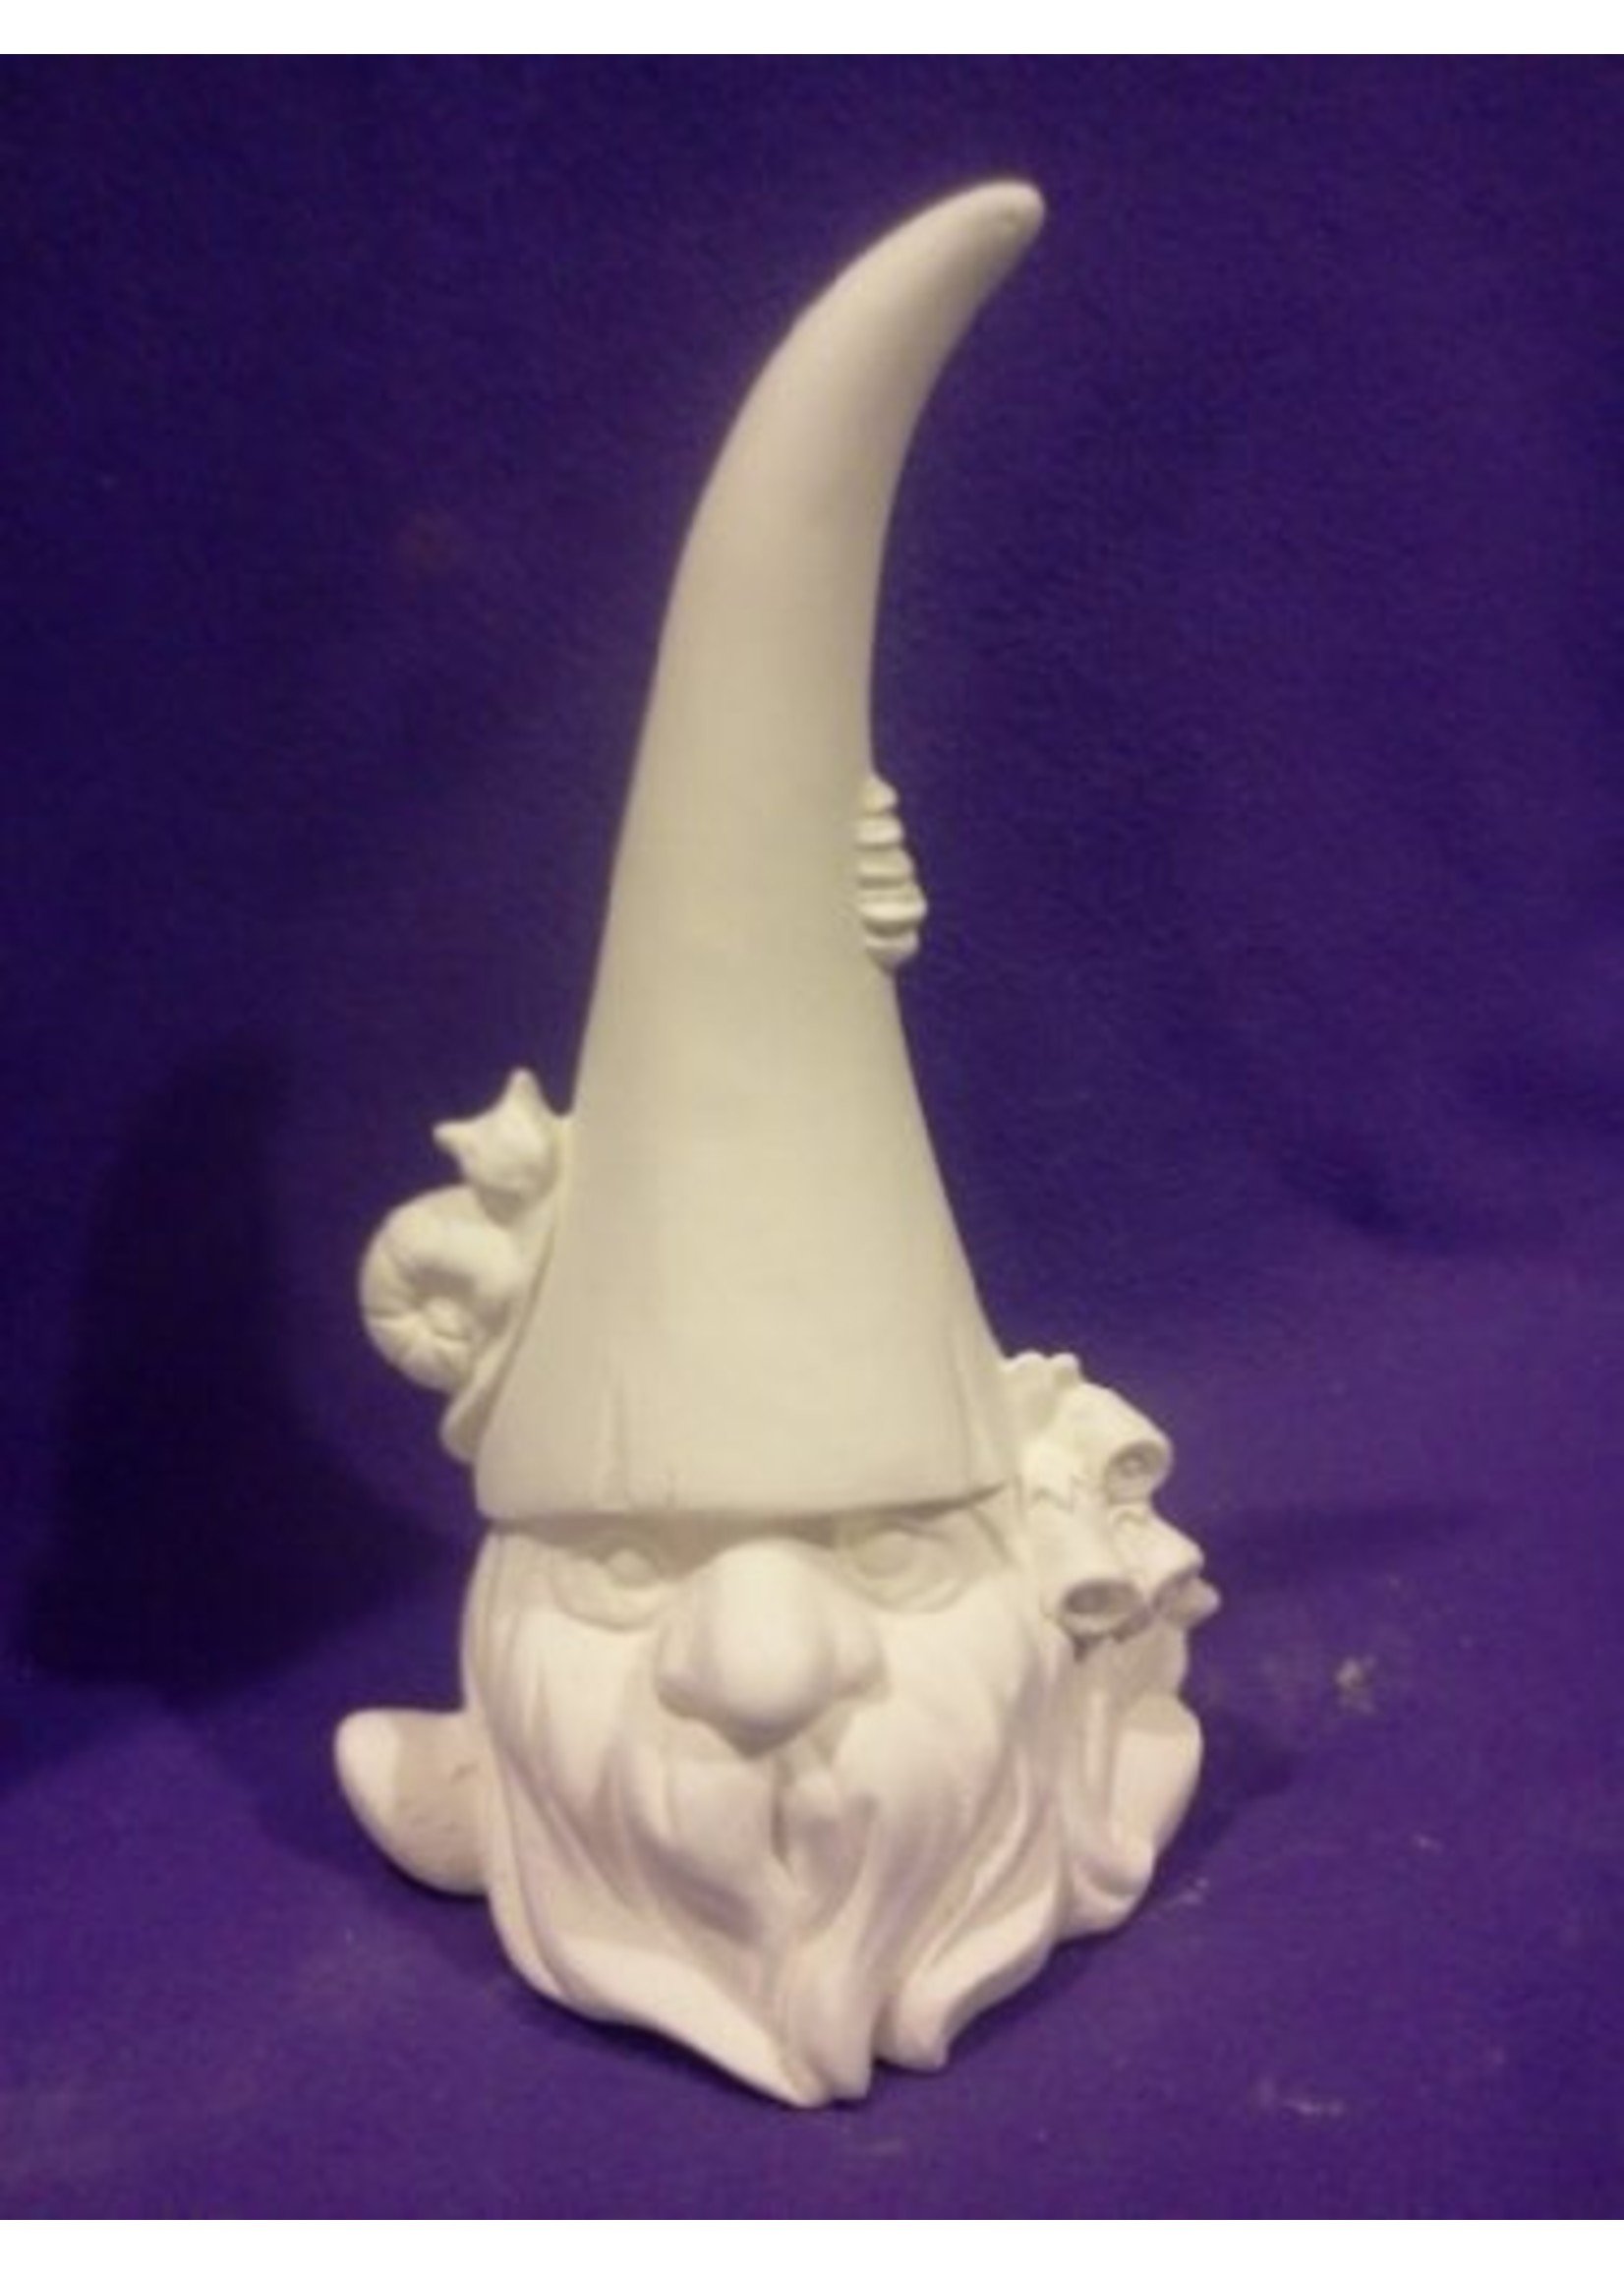 Creative Kreations Ceramics and Gifts Garden Gnome 9" Ceramic Bisque, Ready to Paint